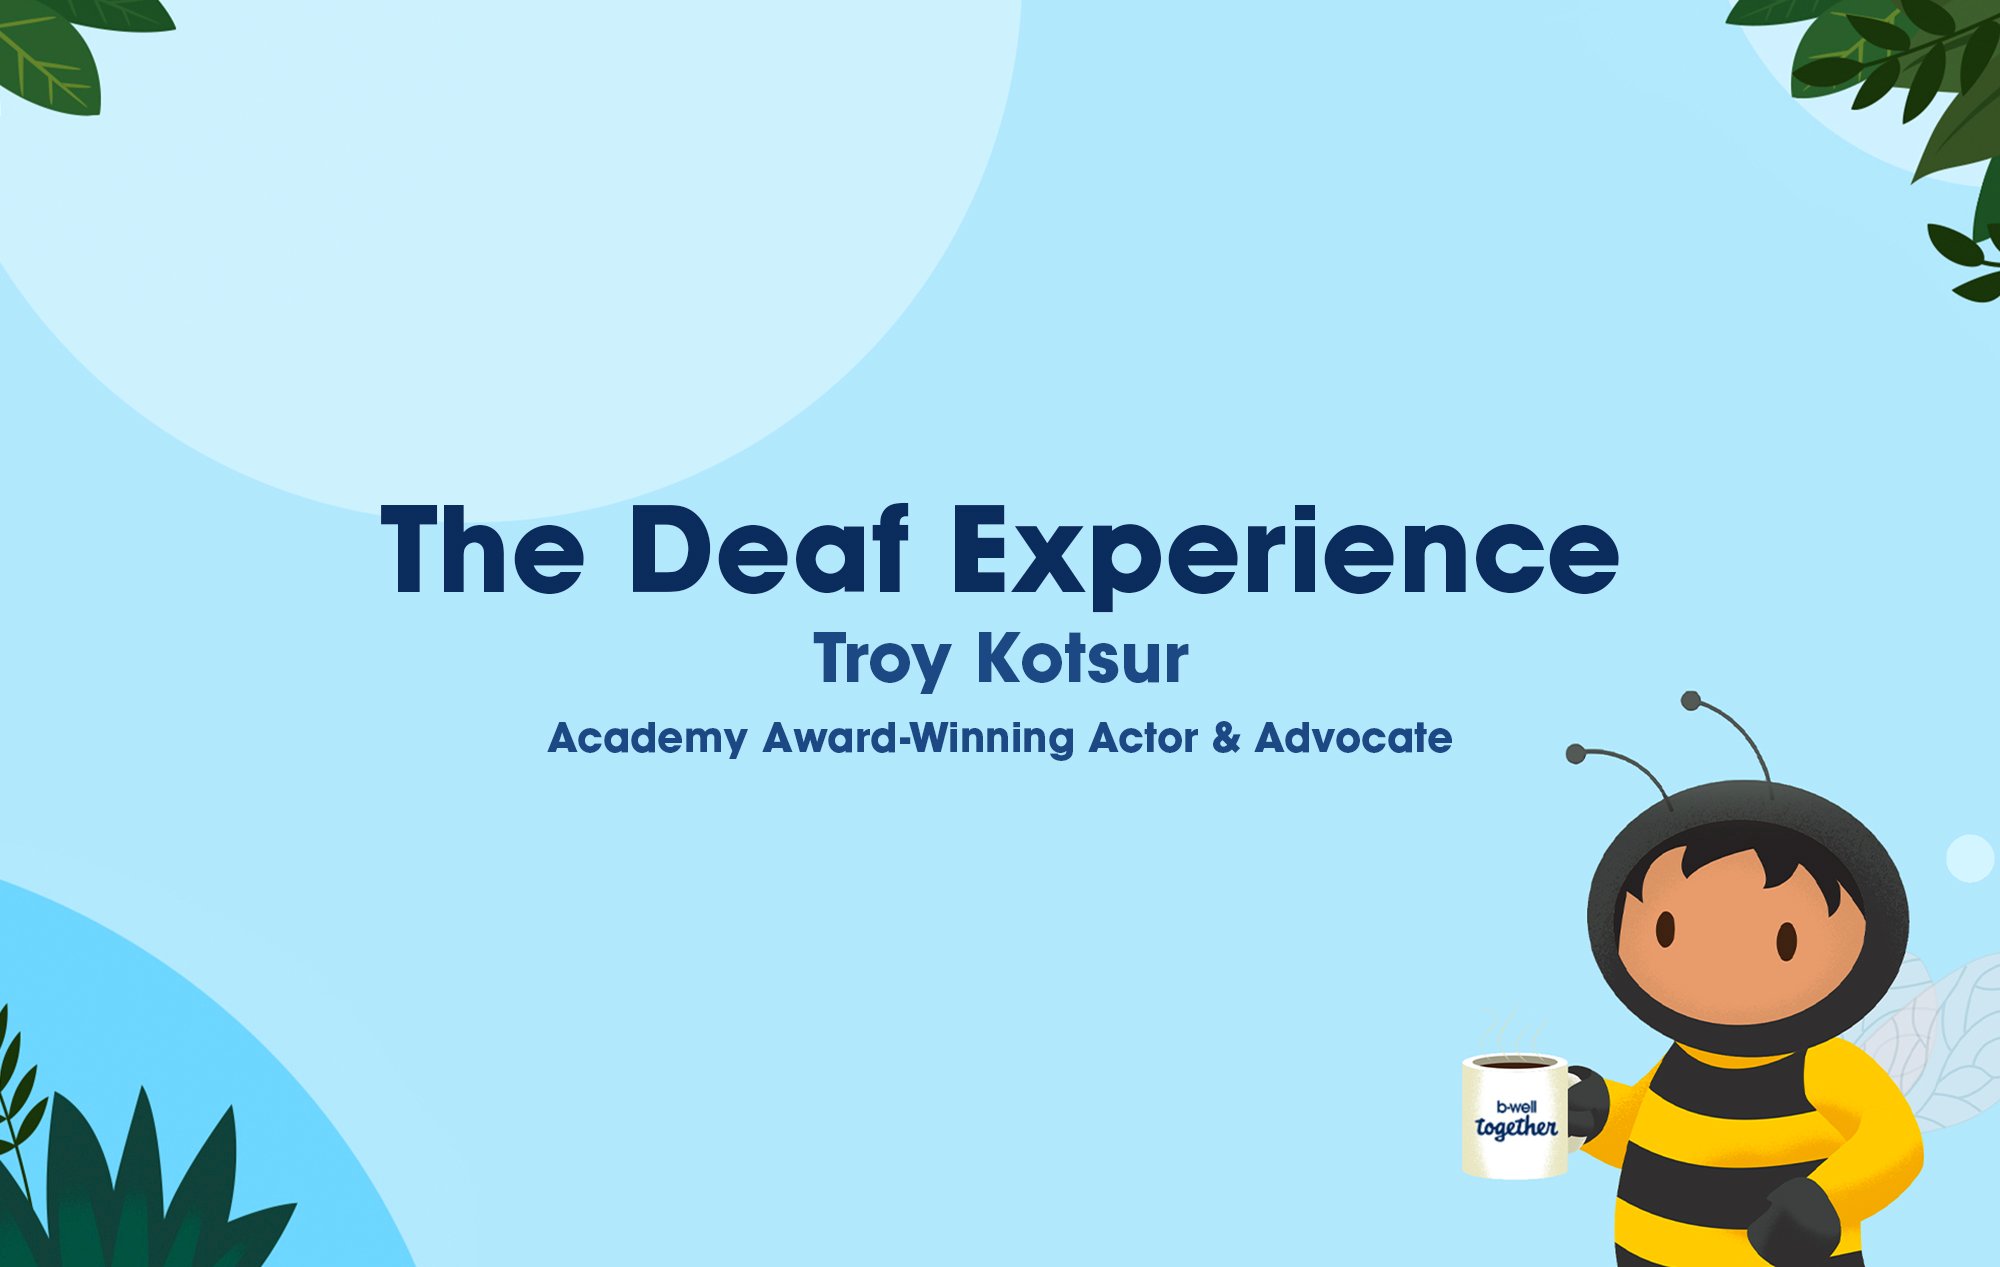 The B-Well Bee character accompanied by text that says, 'The Deaf Experience. Troy Kotsur: Academy Award-Winning Actor & Advocate.'